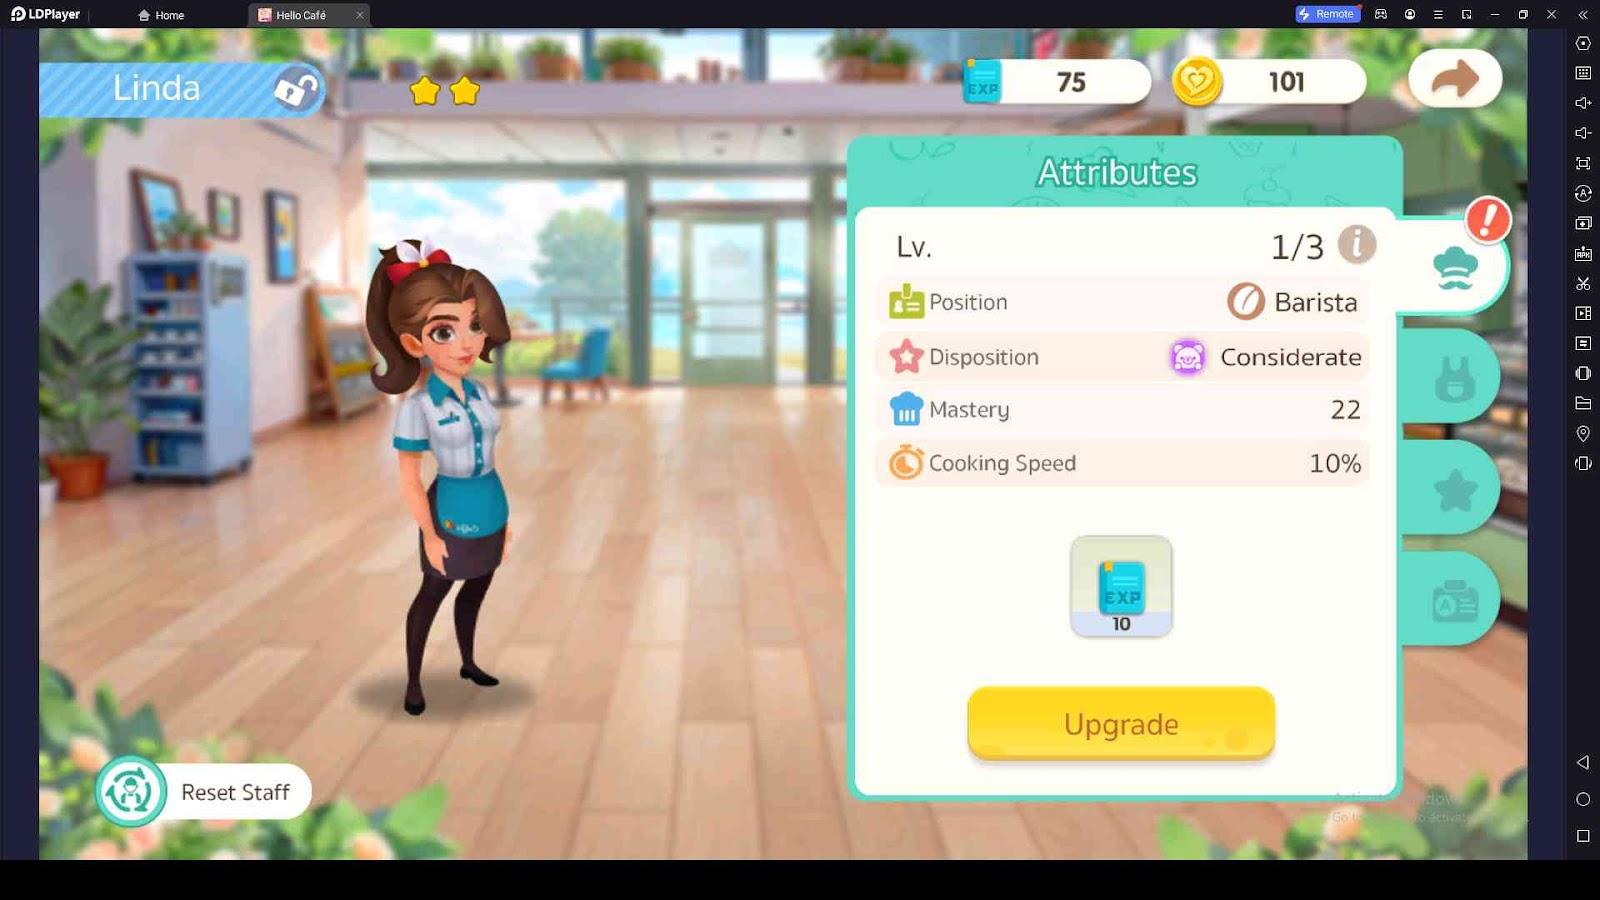 Upgrade Your Staff Members in Hello Café